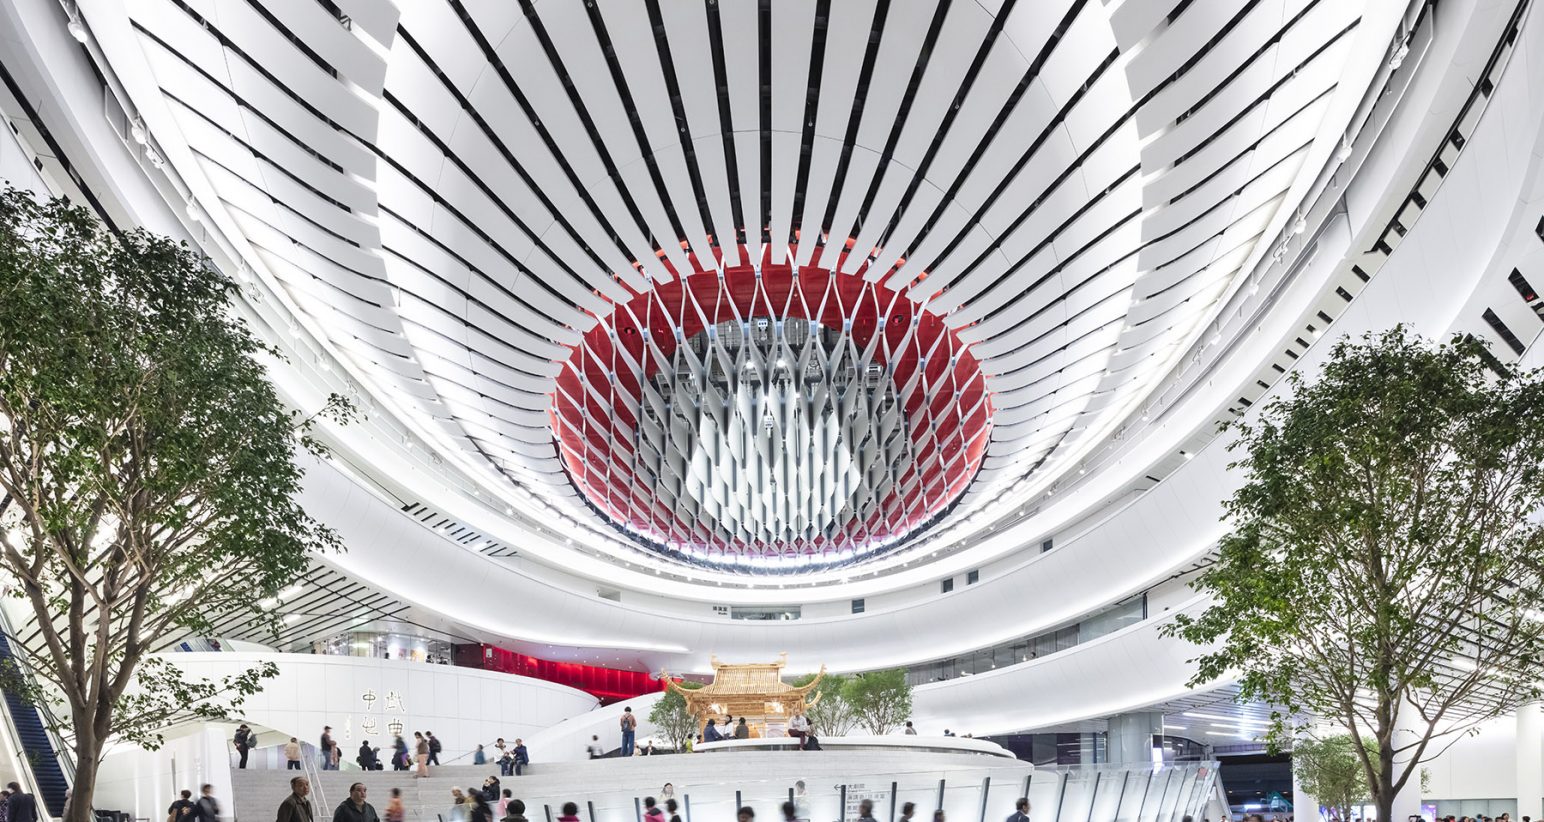 Architectural lighting at Xiqu Centre